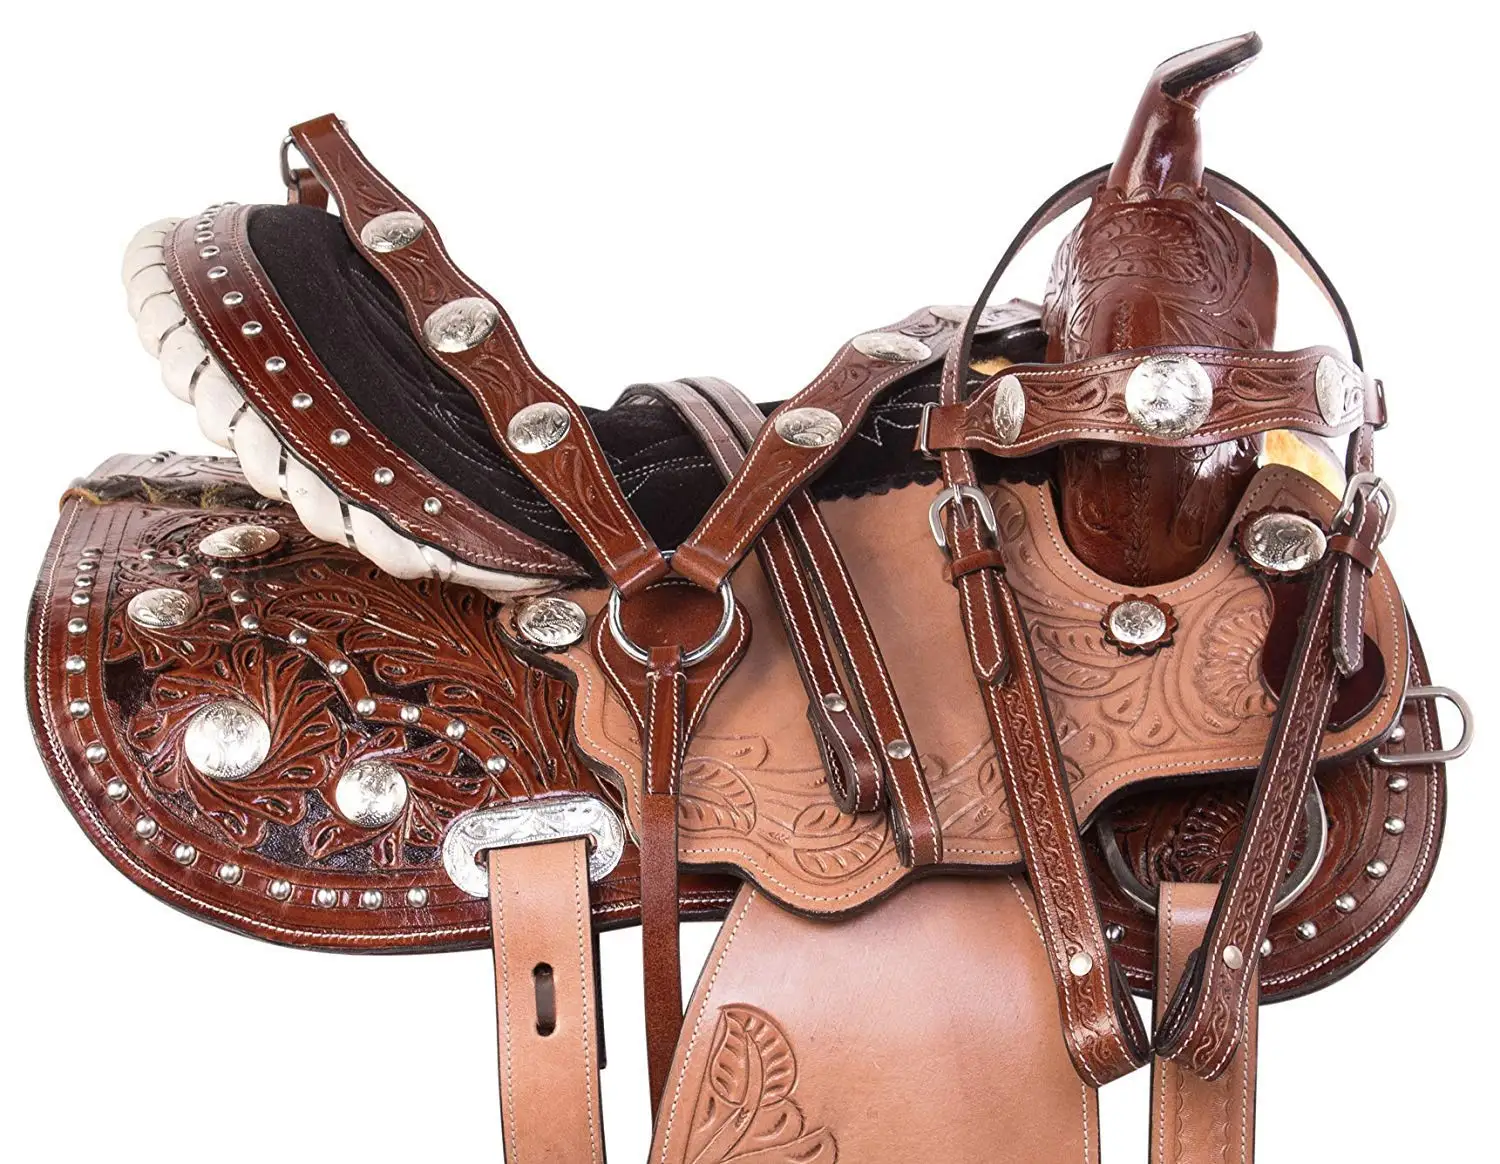 16.5 Inches Seat Breast Collar Reins Size 14 to 18 Inches Seat Available Manaal Enterprises Premium LEATHER Western Barrel Racing Horse Saddle Tack Get Matching Leather Headstall